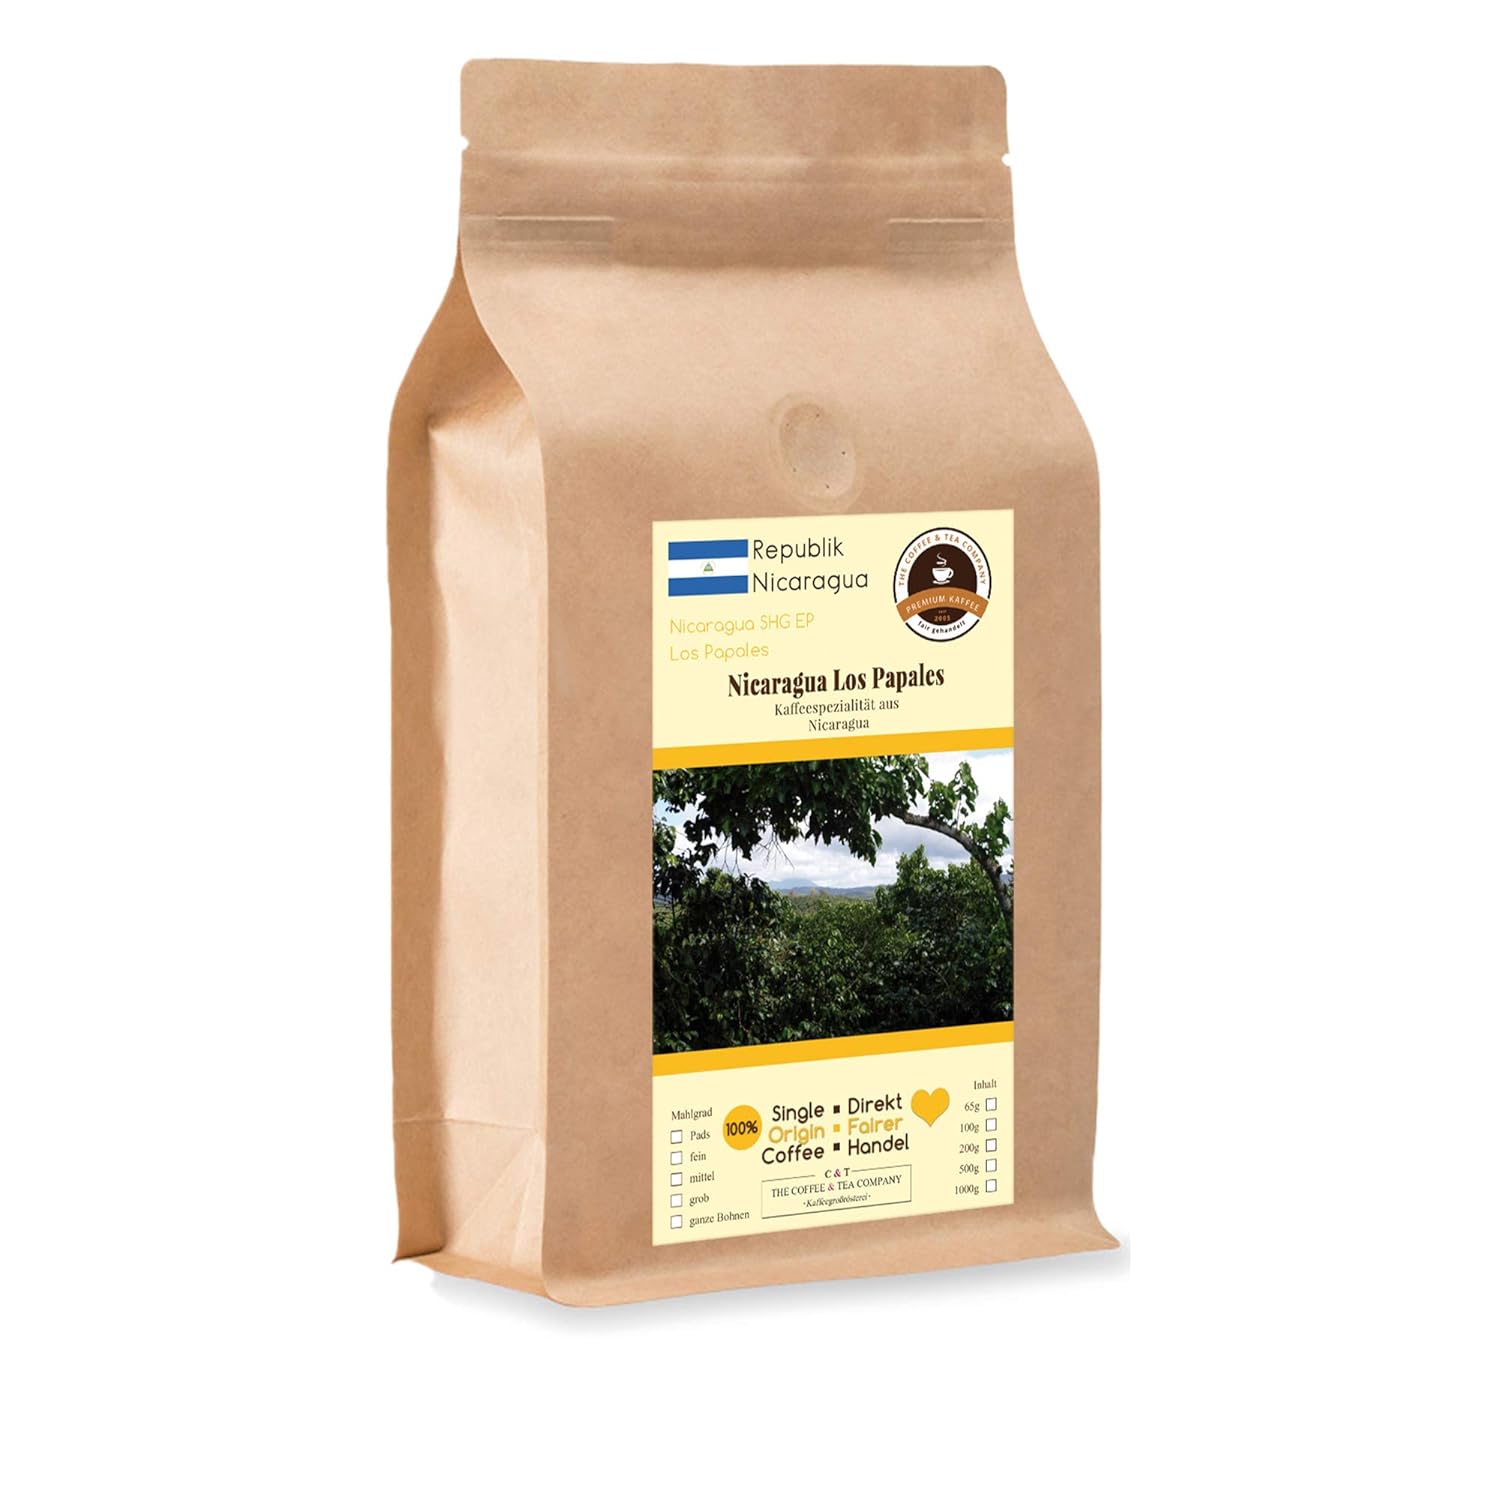 Coffee Globetrotter - Coffee with Heart - Nicaragua Los Papales - 1000 g Coarse Ground - for Stamp Jug French Press Coffee Maker - Top Coffee Fair Trade Supports Social Projects